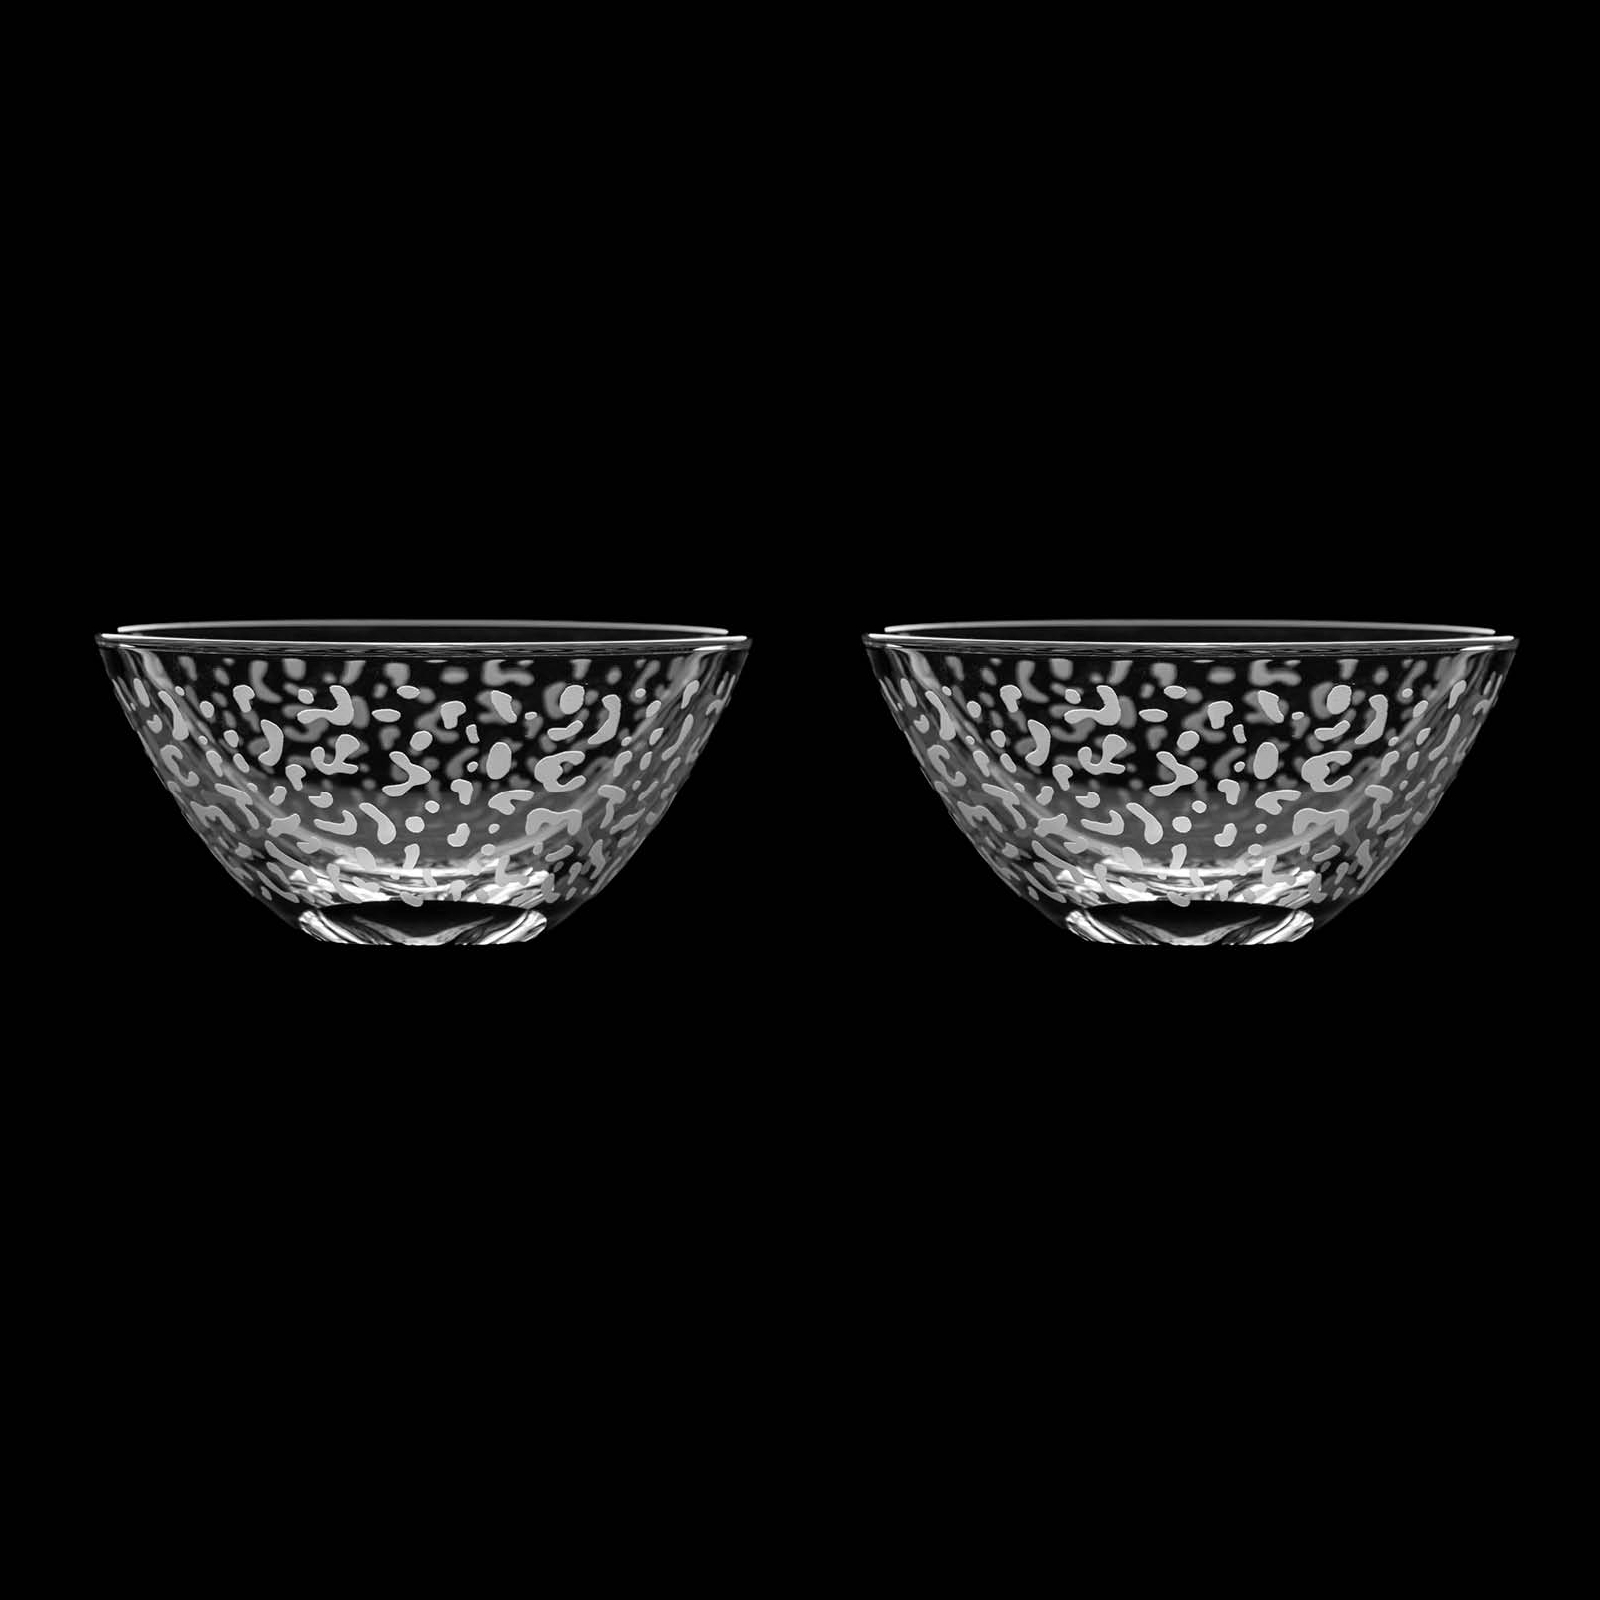 Salviati nut bowls with "Raindrops" cold-worked decoration. Set of 2.